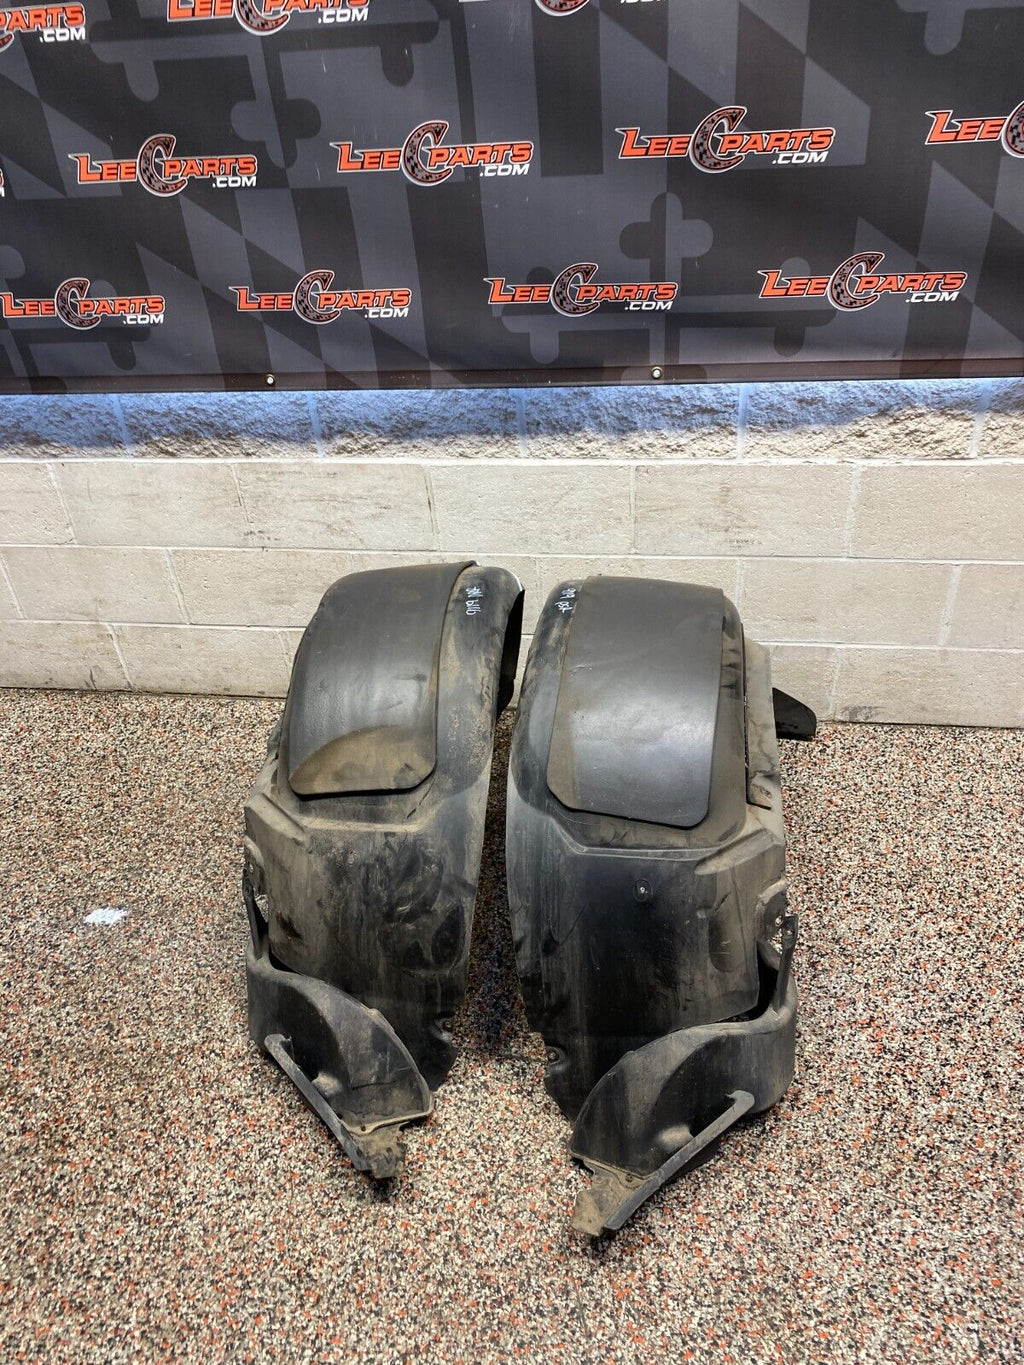 2006 CORVETTE C6 OEM REAR FENDER LINERS WITH BRAKE DUCTS PAIR DR PS USED